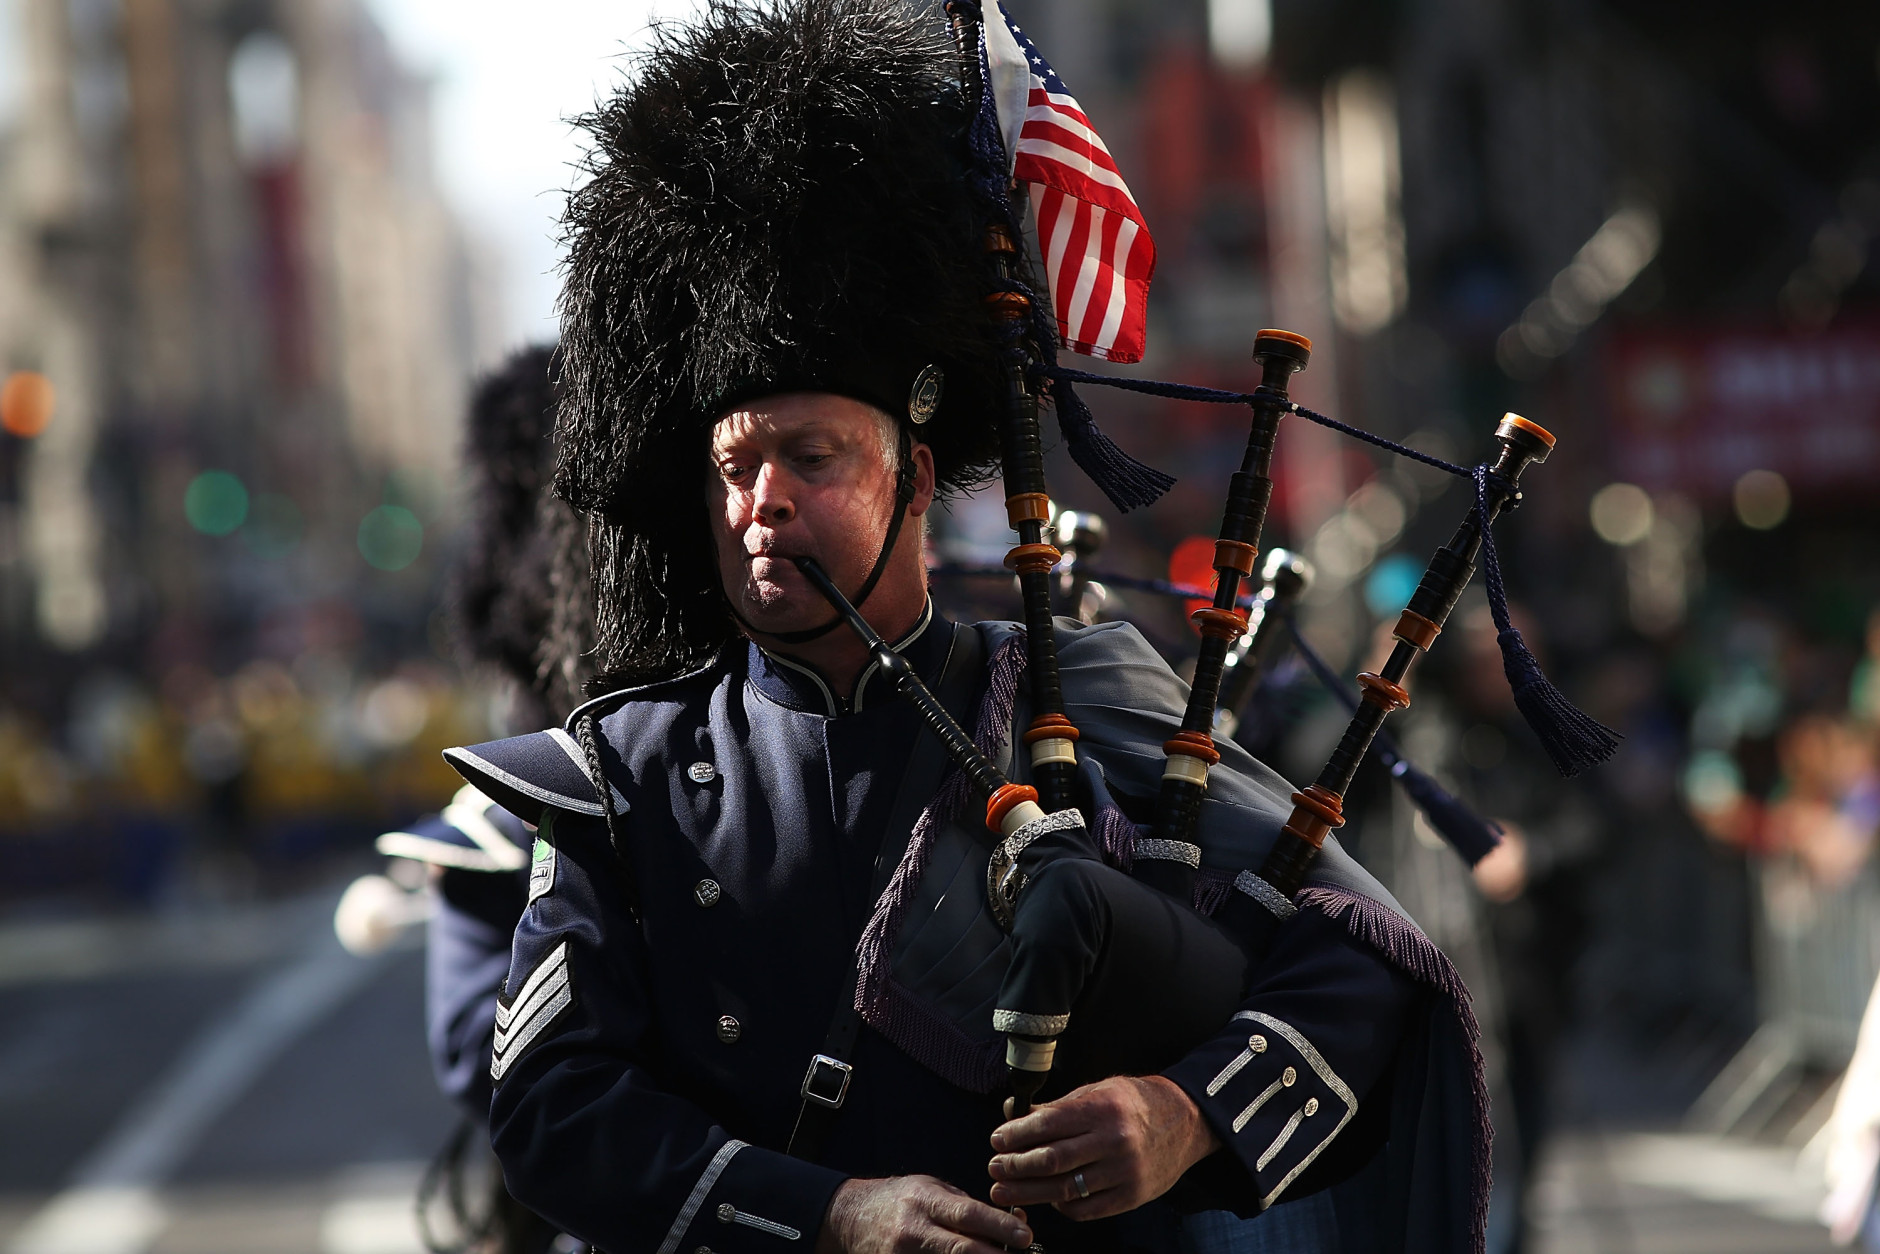 NEW YORK, NY - MARCH 17:  Participants march in the annual St. Patrick's Day parade, one of the largest and oldest in the world on March 17, 2016 in New York City. Now that a ban on openly gay groups has been dropped, New York Mayor Bill de Blasio is attending the parade for the first time since he became mayor in 2014. The parade goes up Fifth Avenue ending at East 79th Street and will draw an estimated 2 million spectators along its 35-block stretch.  (Photo by Spencer Platt/Getty Images)